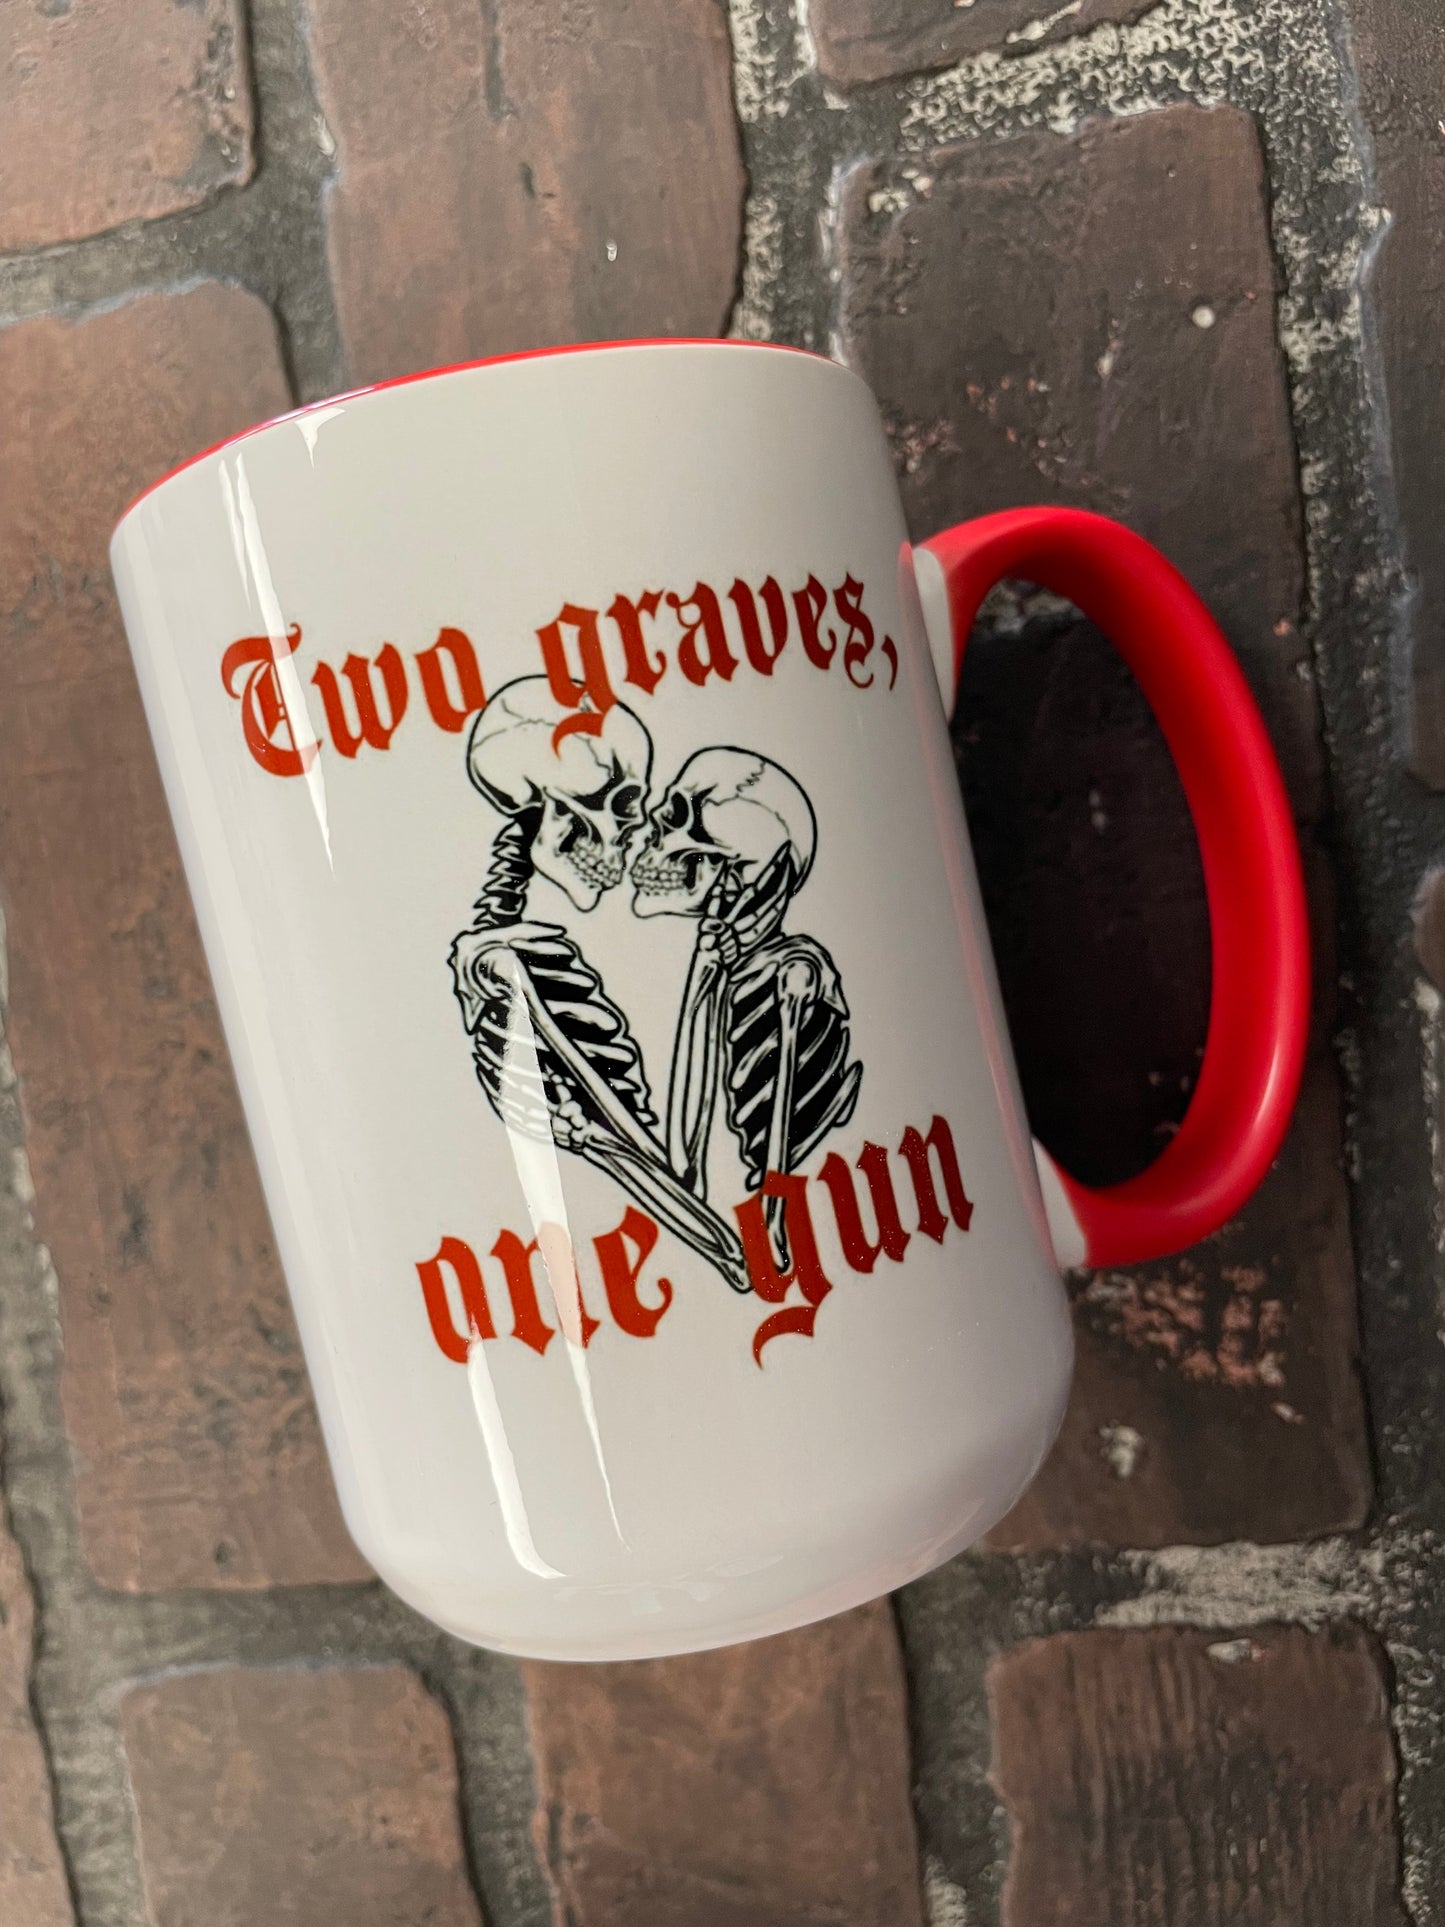 Two graves one gun, Taylor Swift, Double sided Red inner & Handle 15oz dishwasher safe Coffee Mug